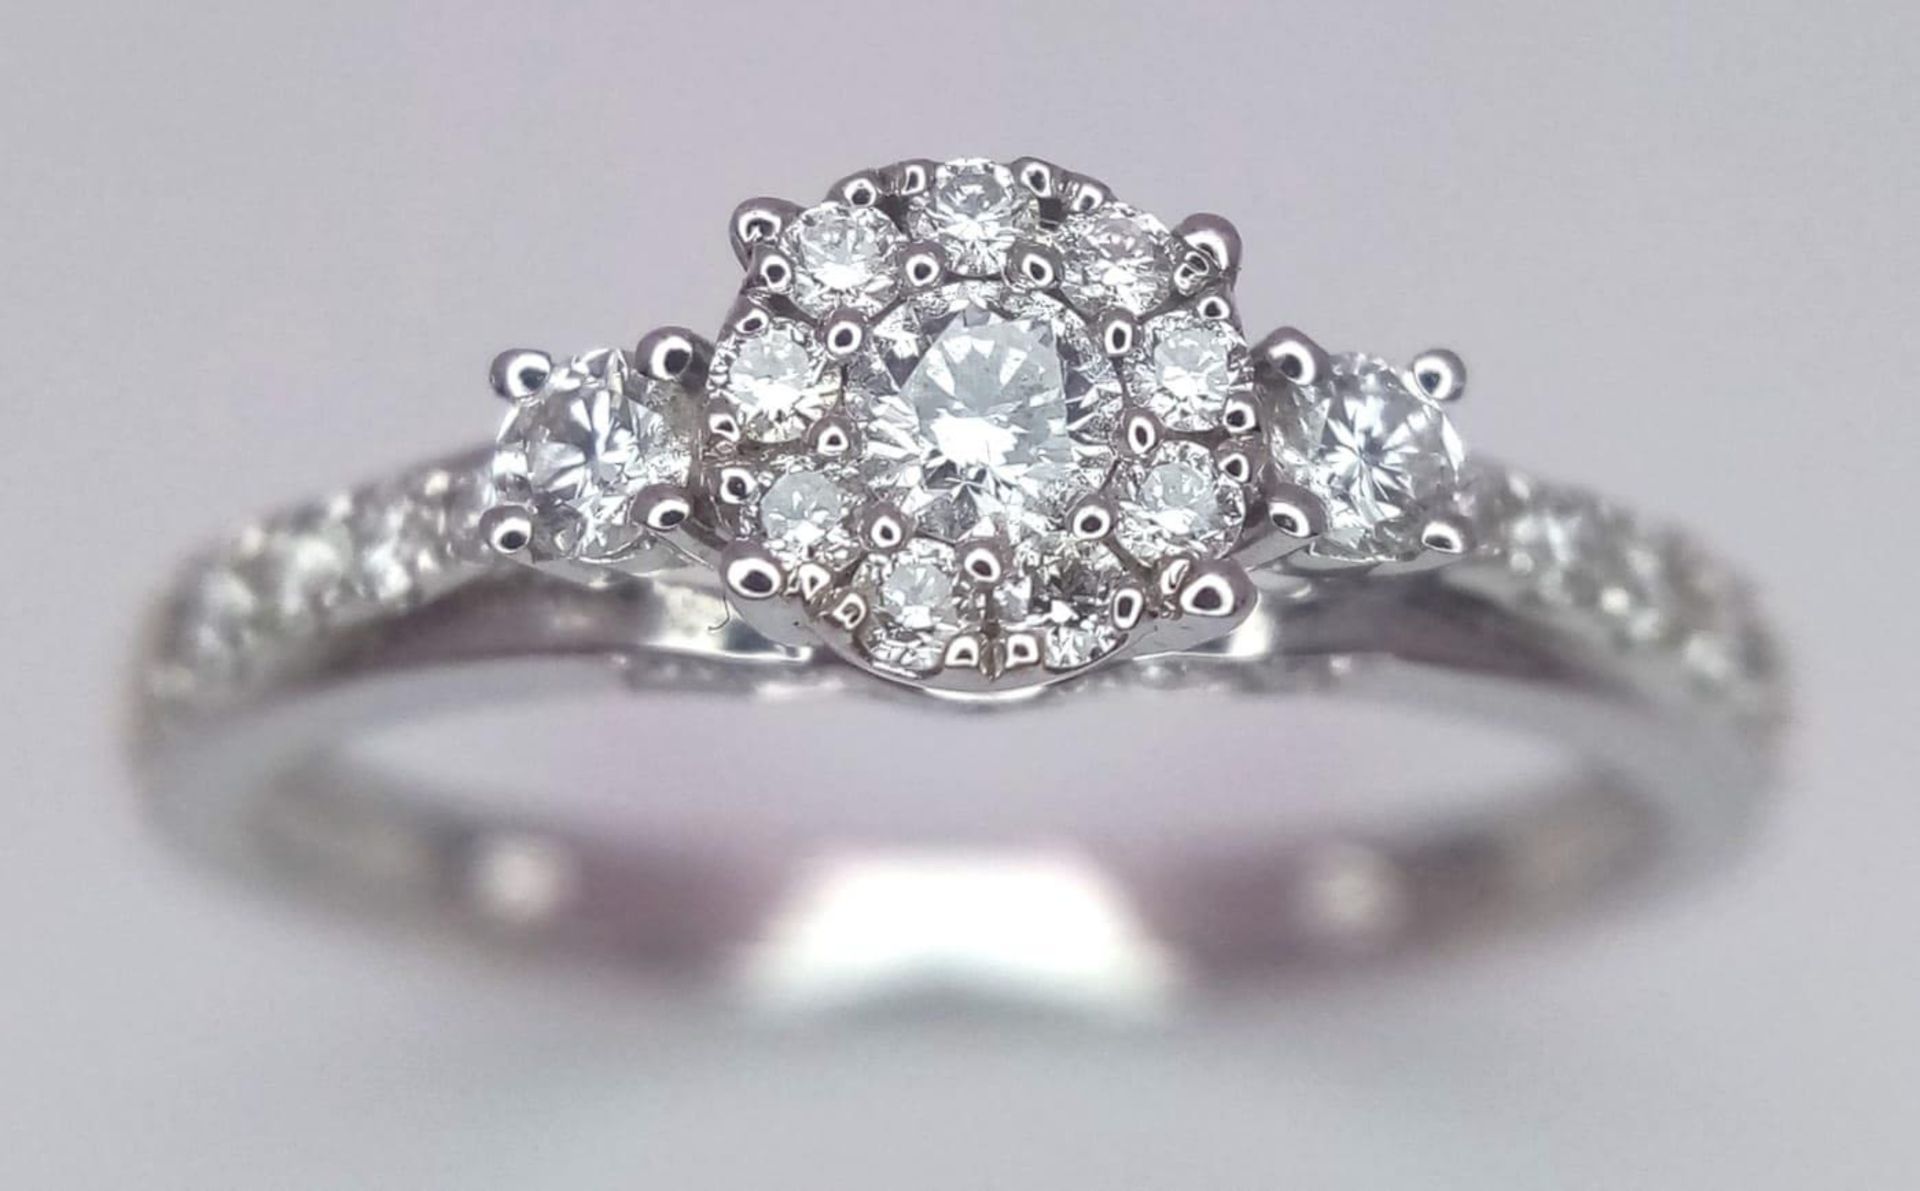 A 9 K white gold ring with a diamond cluster and more diamonds on the shoulders (total 0.41 carats), - Image 5 of 8